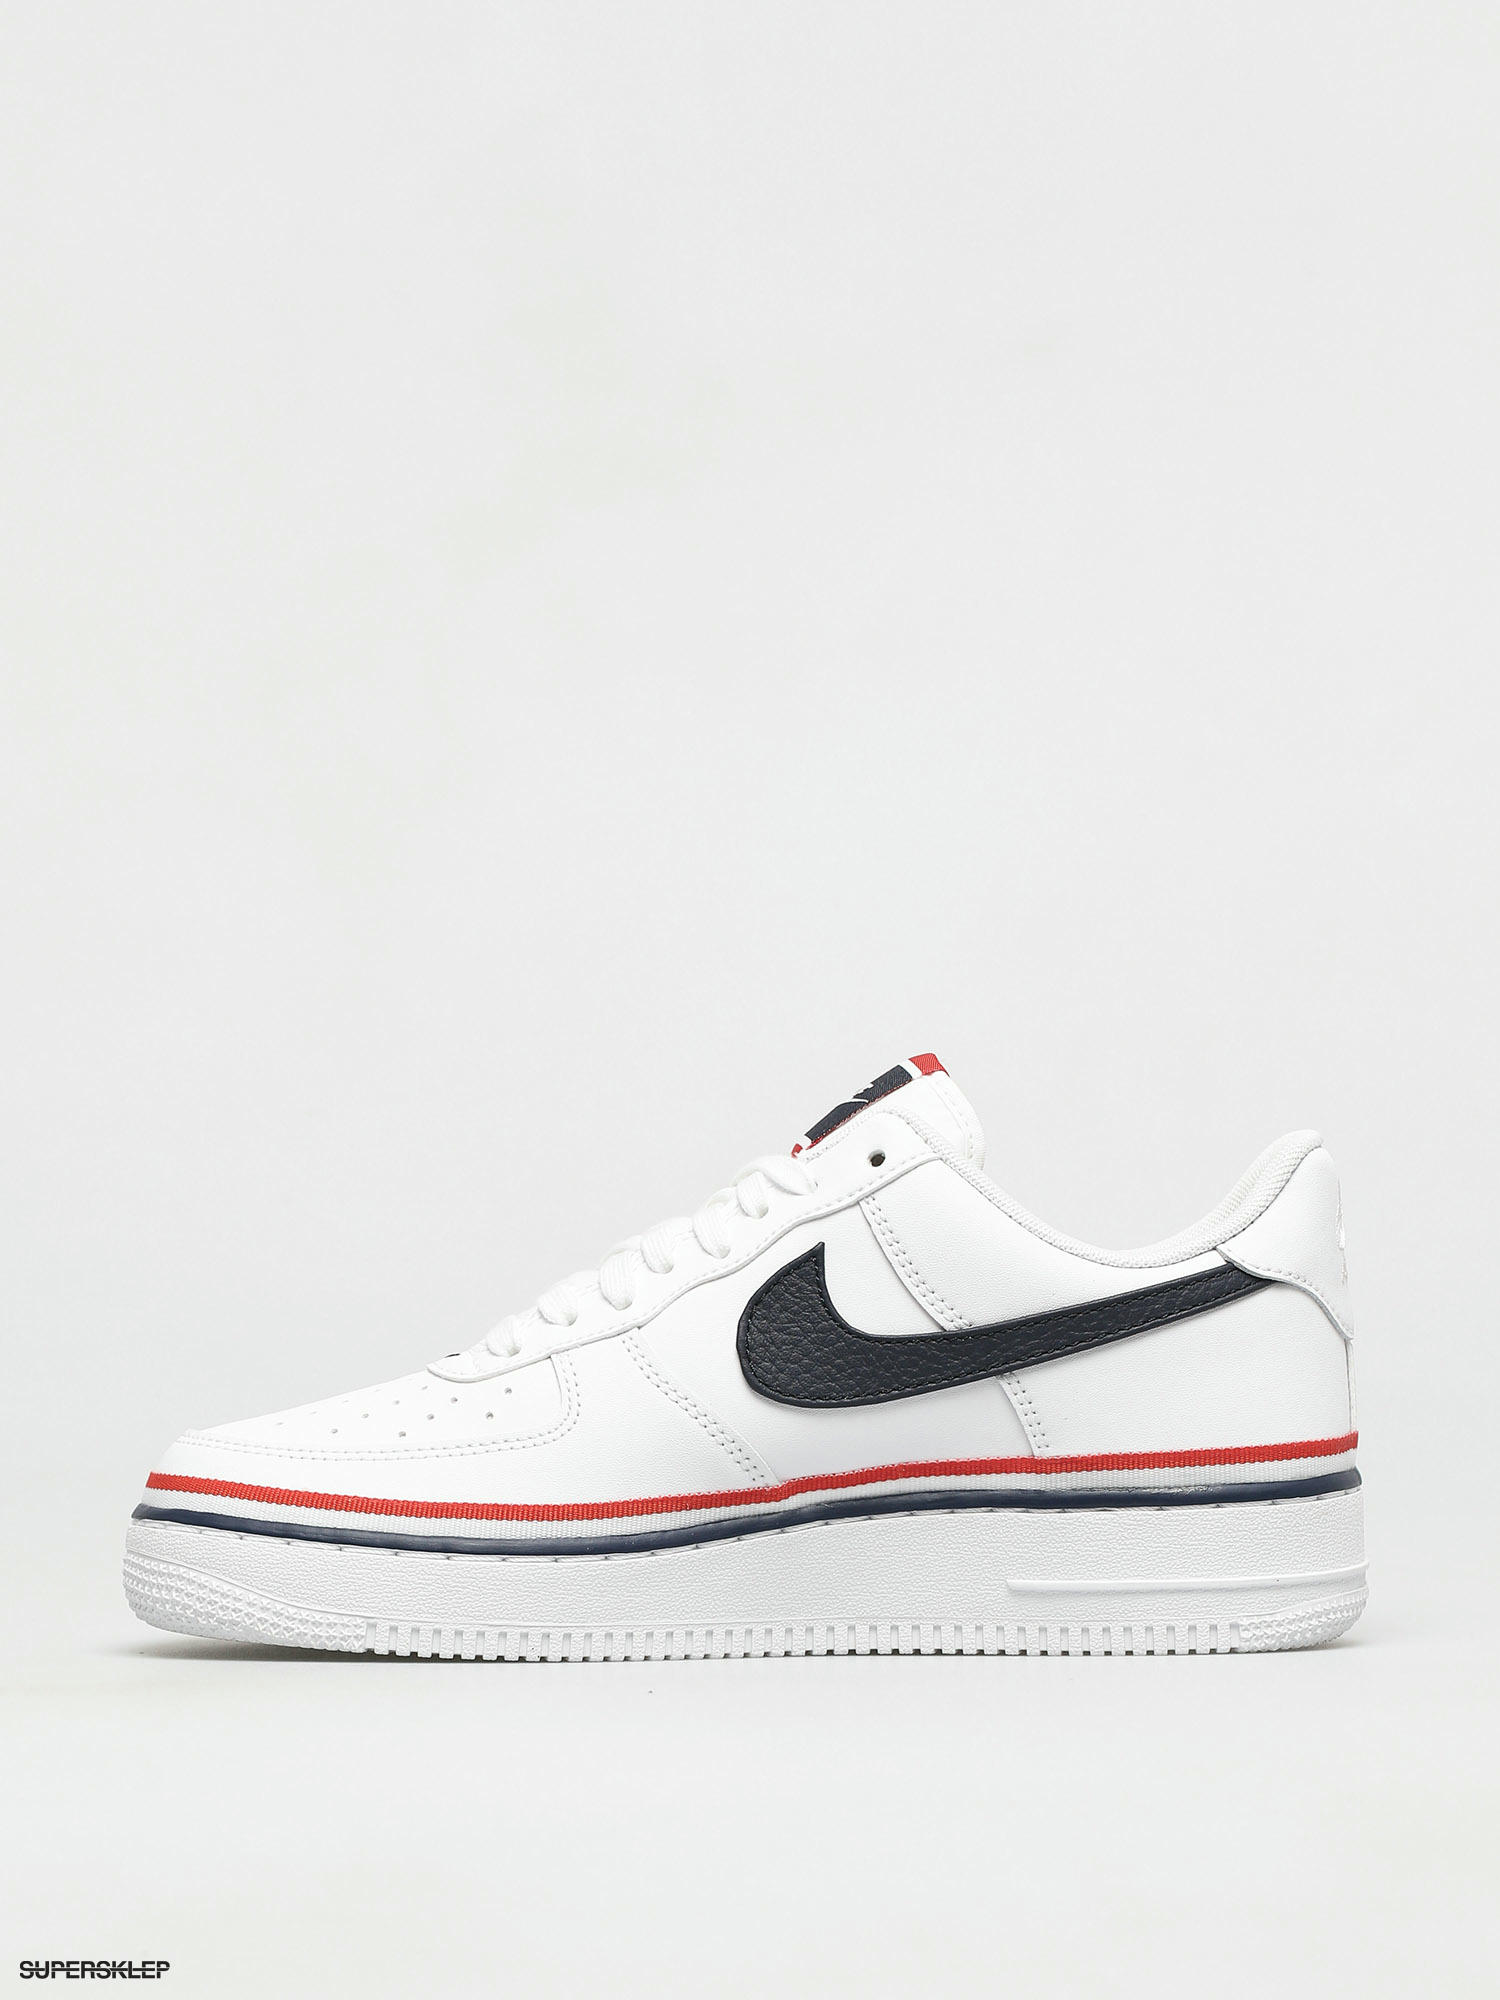 NIKE AIR FORCE 1 LV8 1 (GS) WHITE/OBSIDIAN-HABANERO RED [CW0984 100] Size  6.5